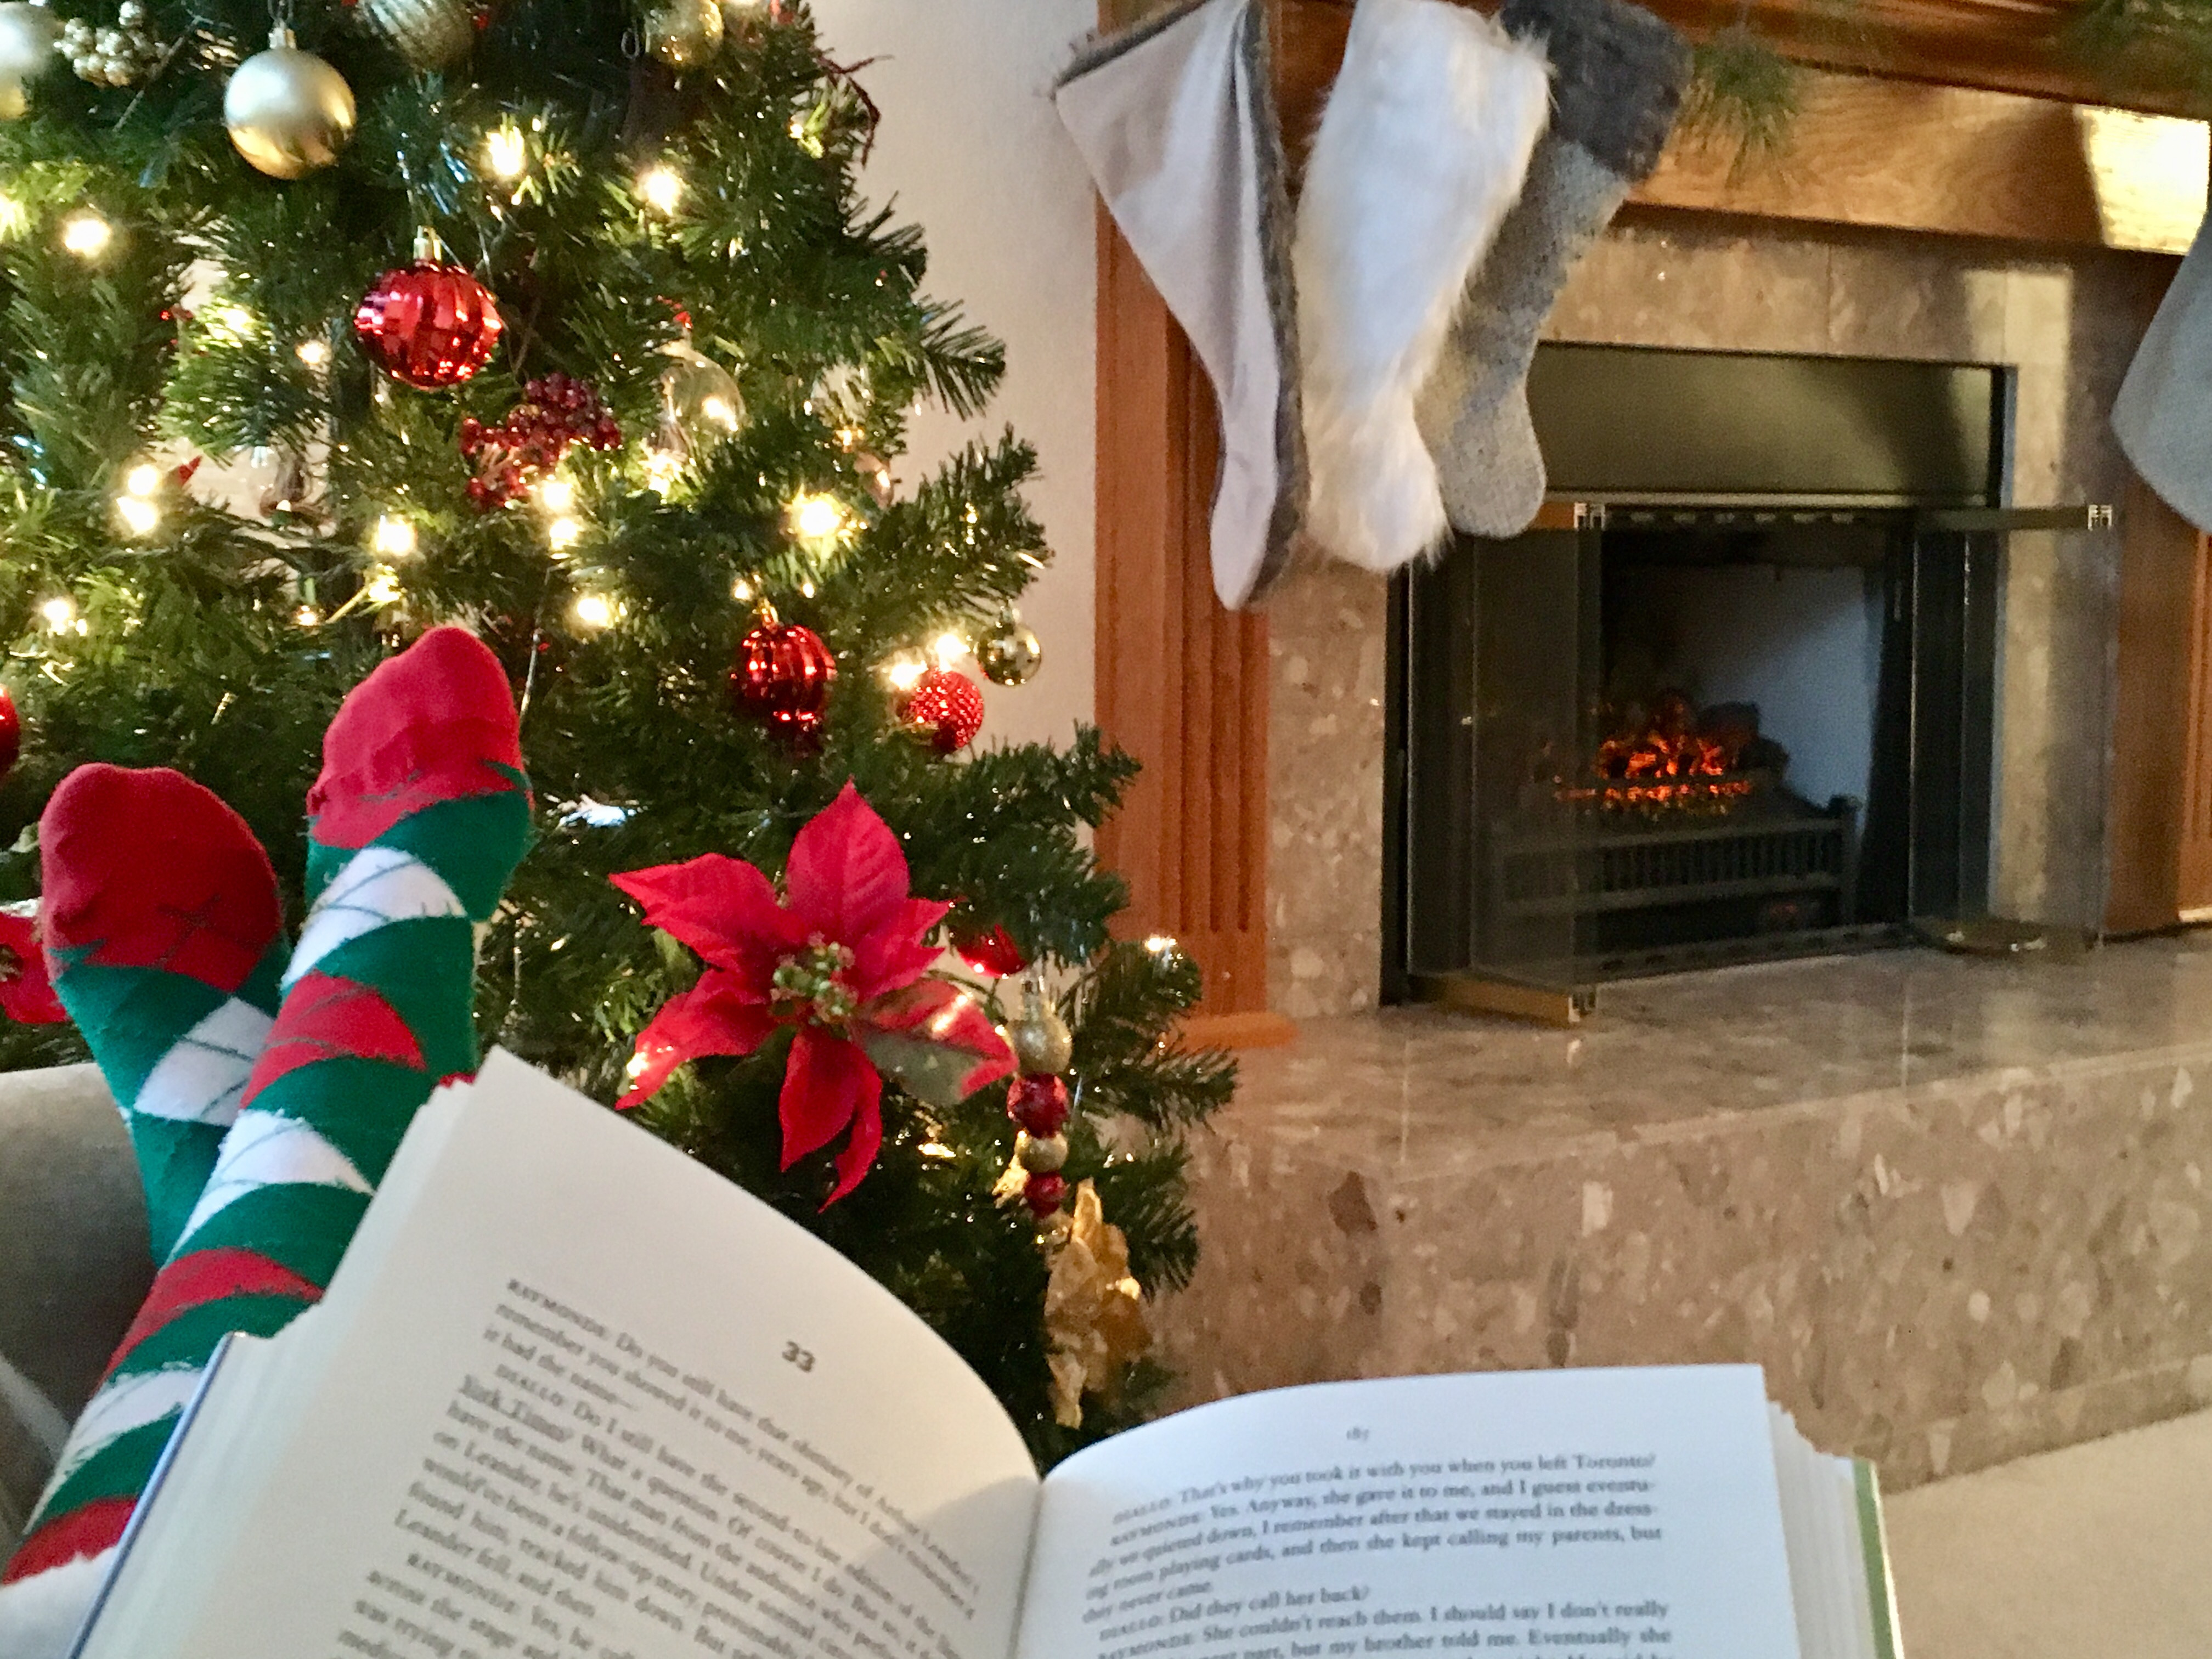 Open book in front of Christmas tree and fireplace